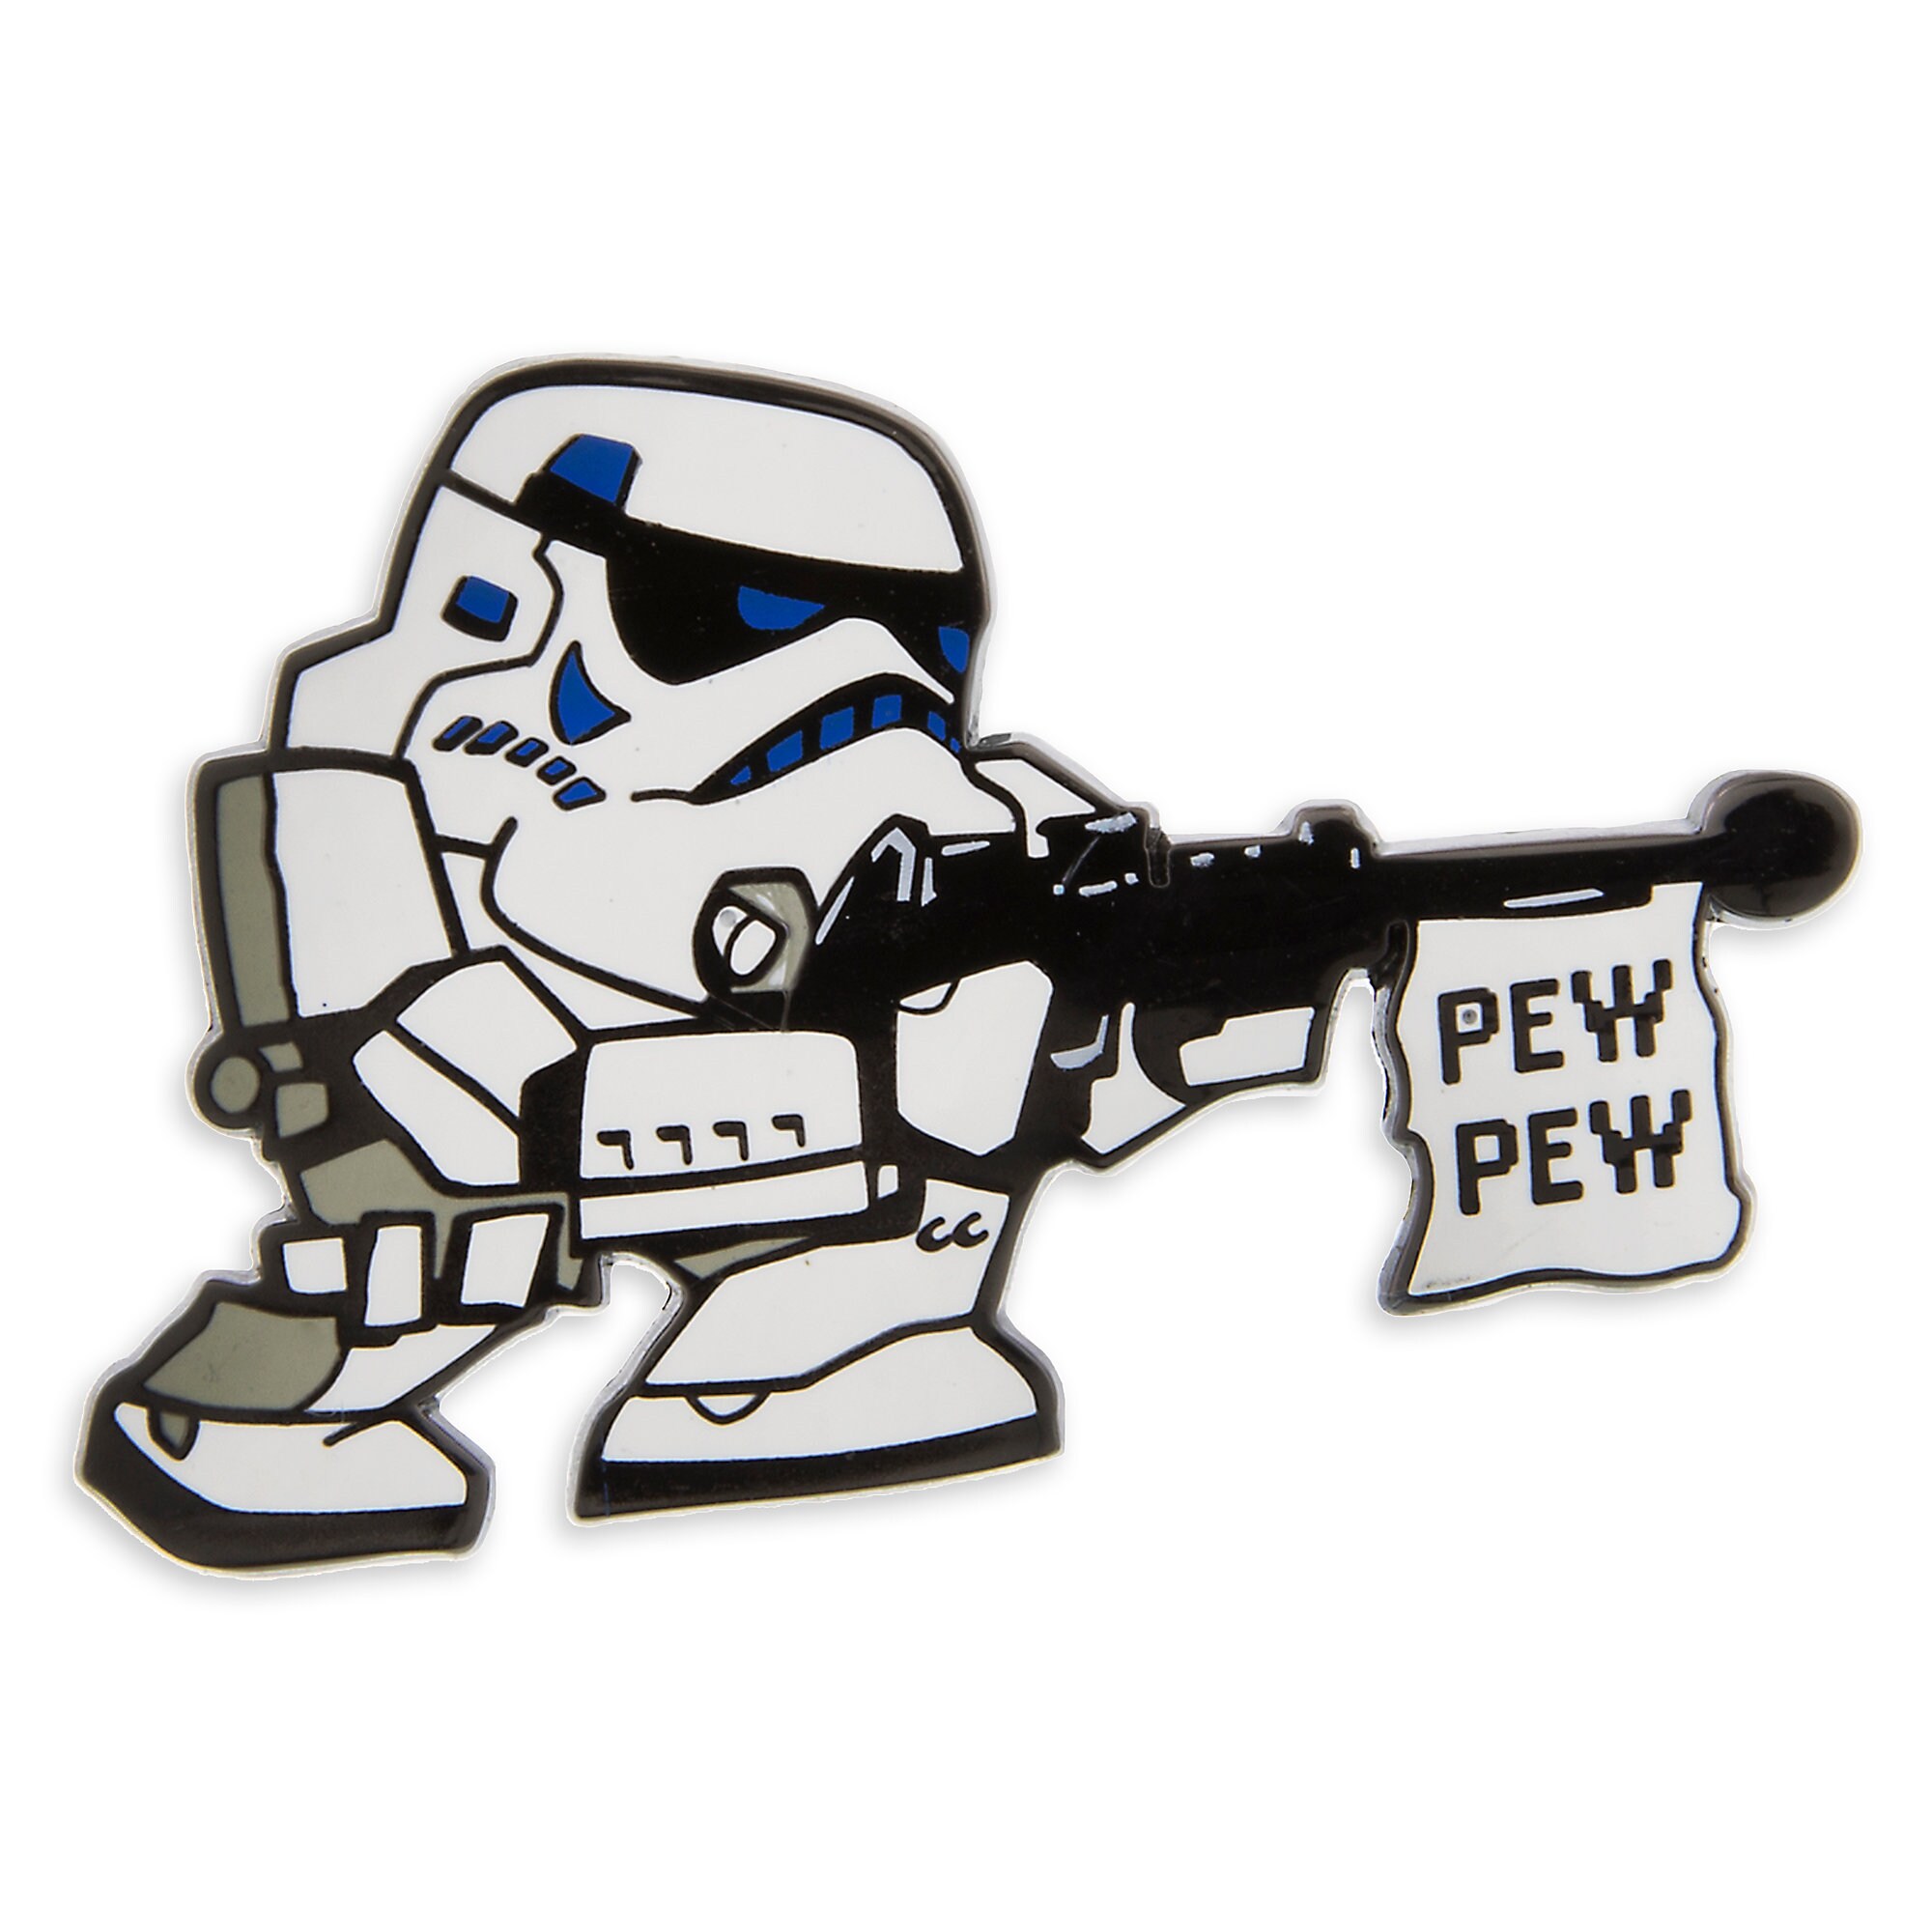 Stormtrooper ''Pew Pew'' Pin - Star Wars now out for pu...